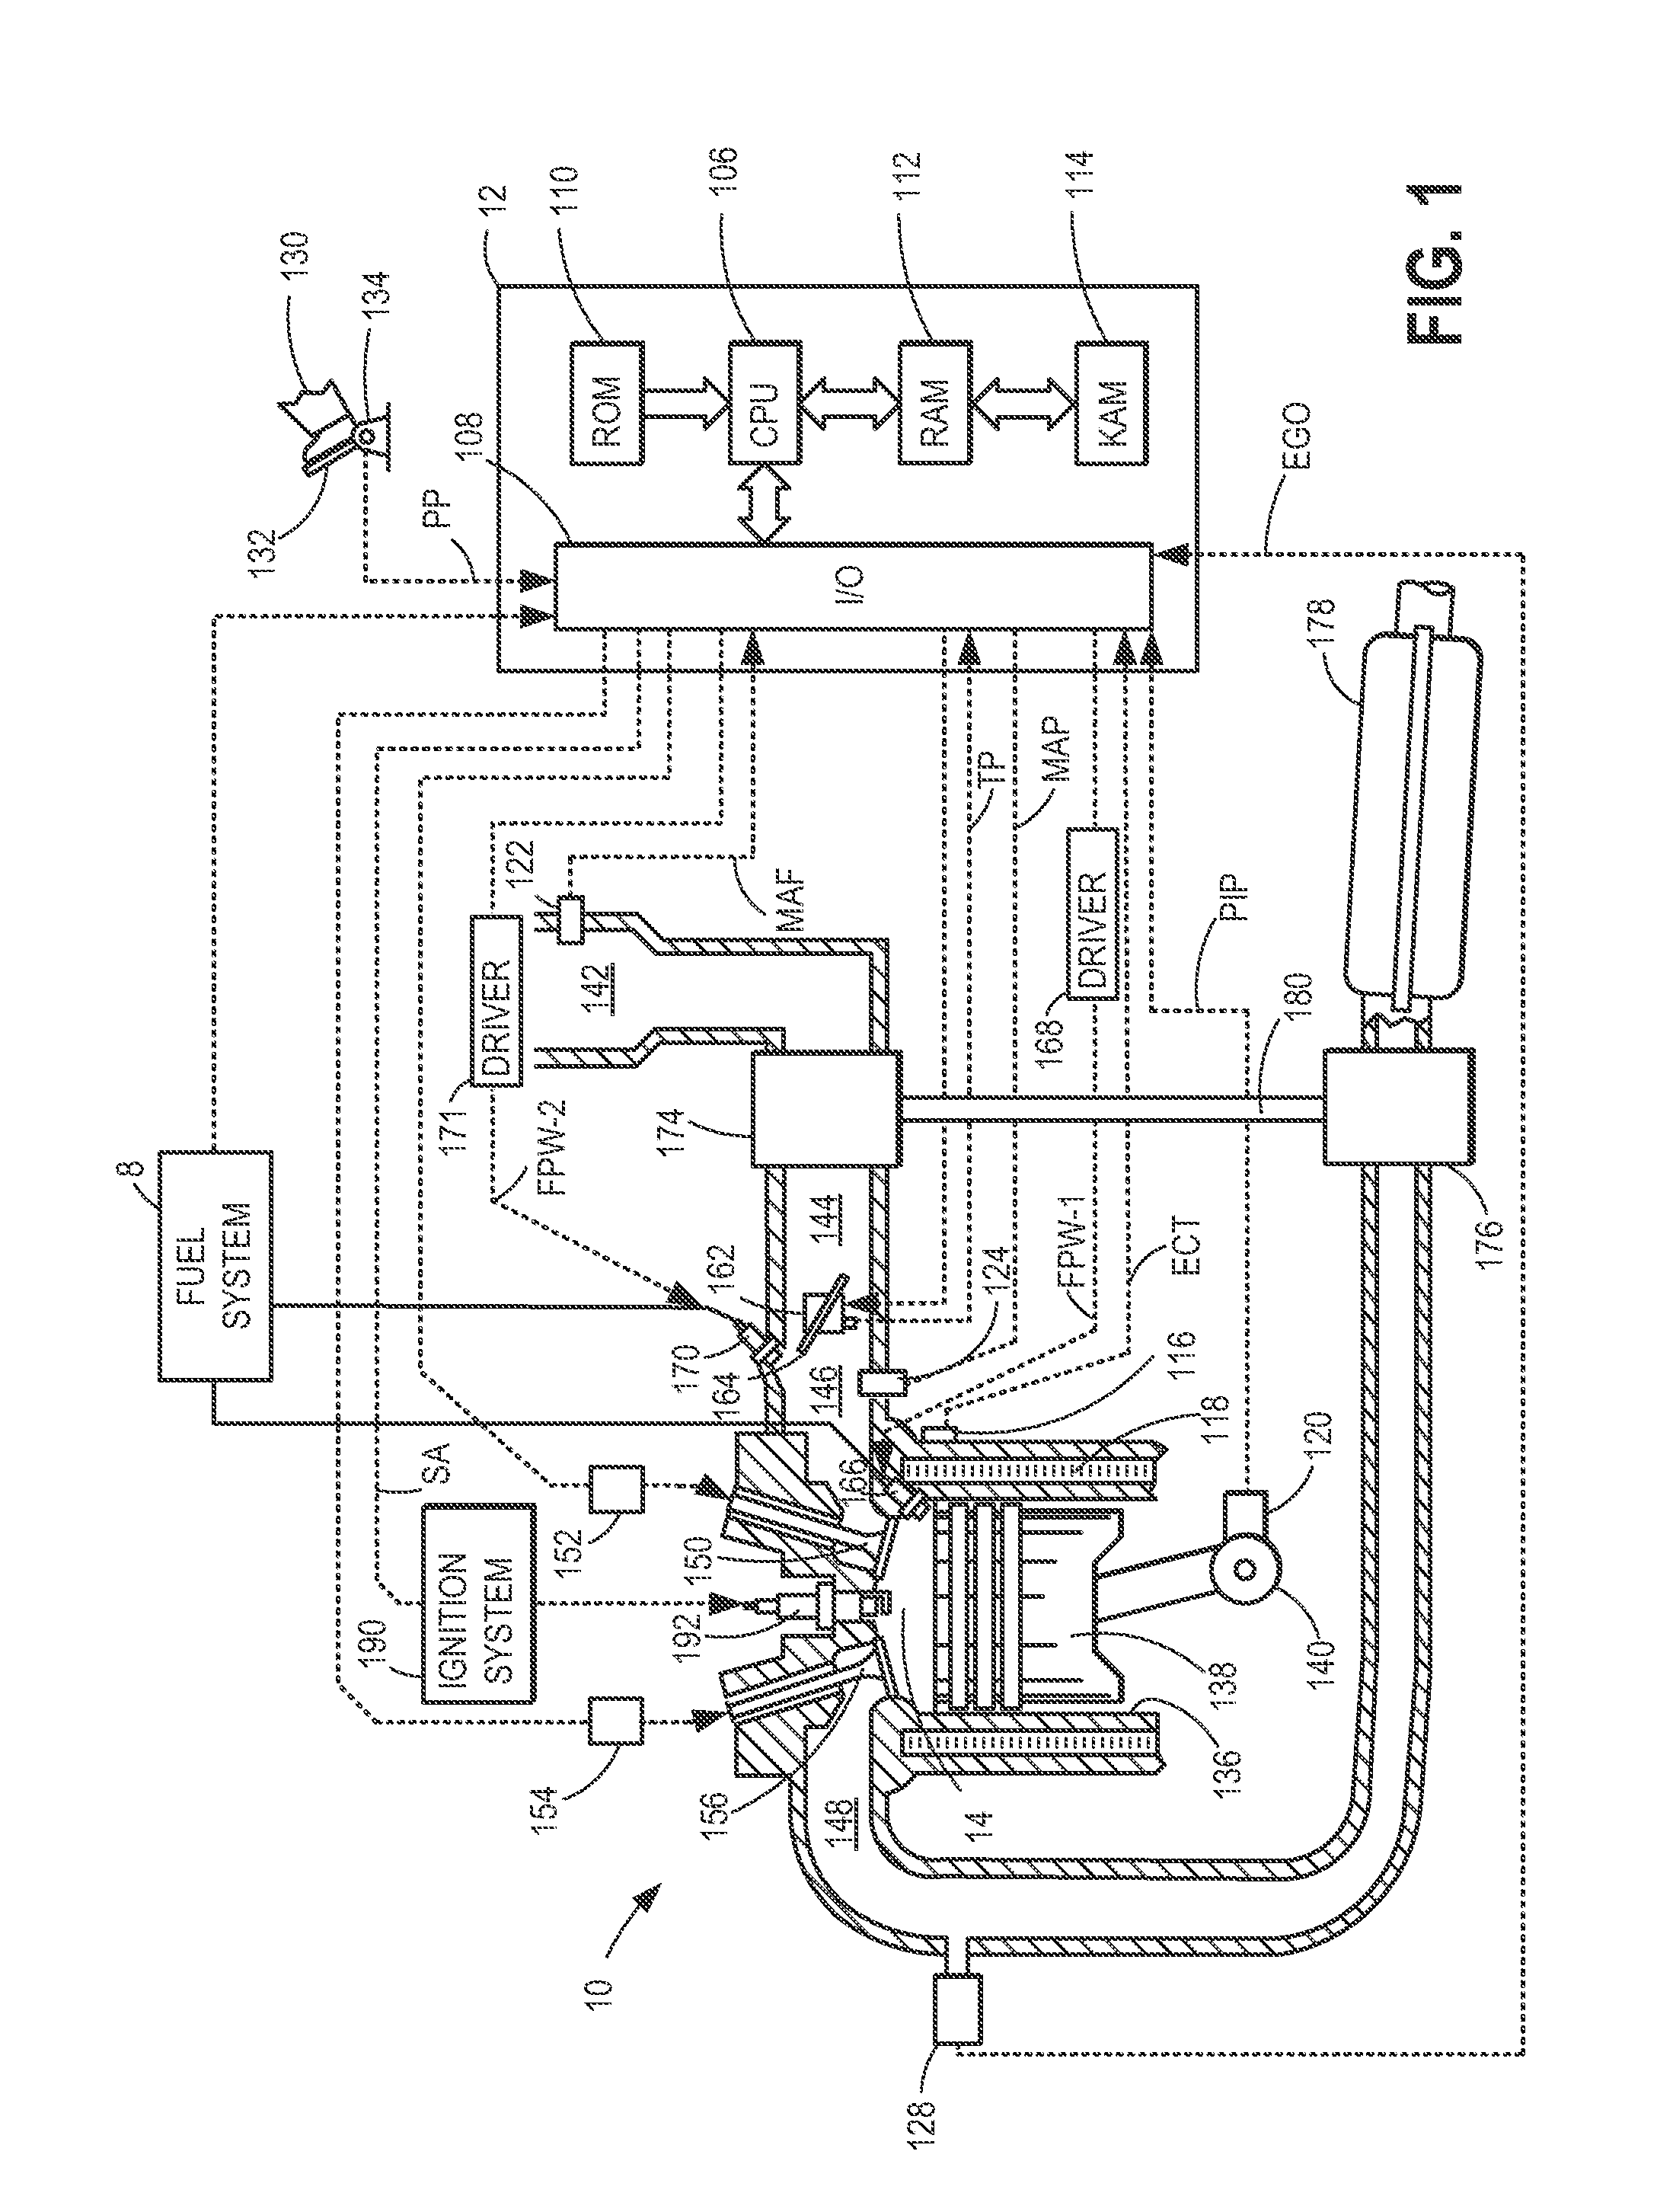 Fuel system for a multi-fuel engine